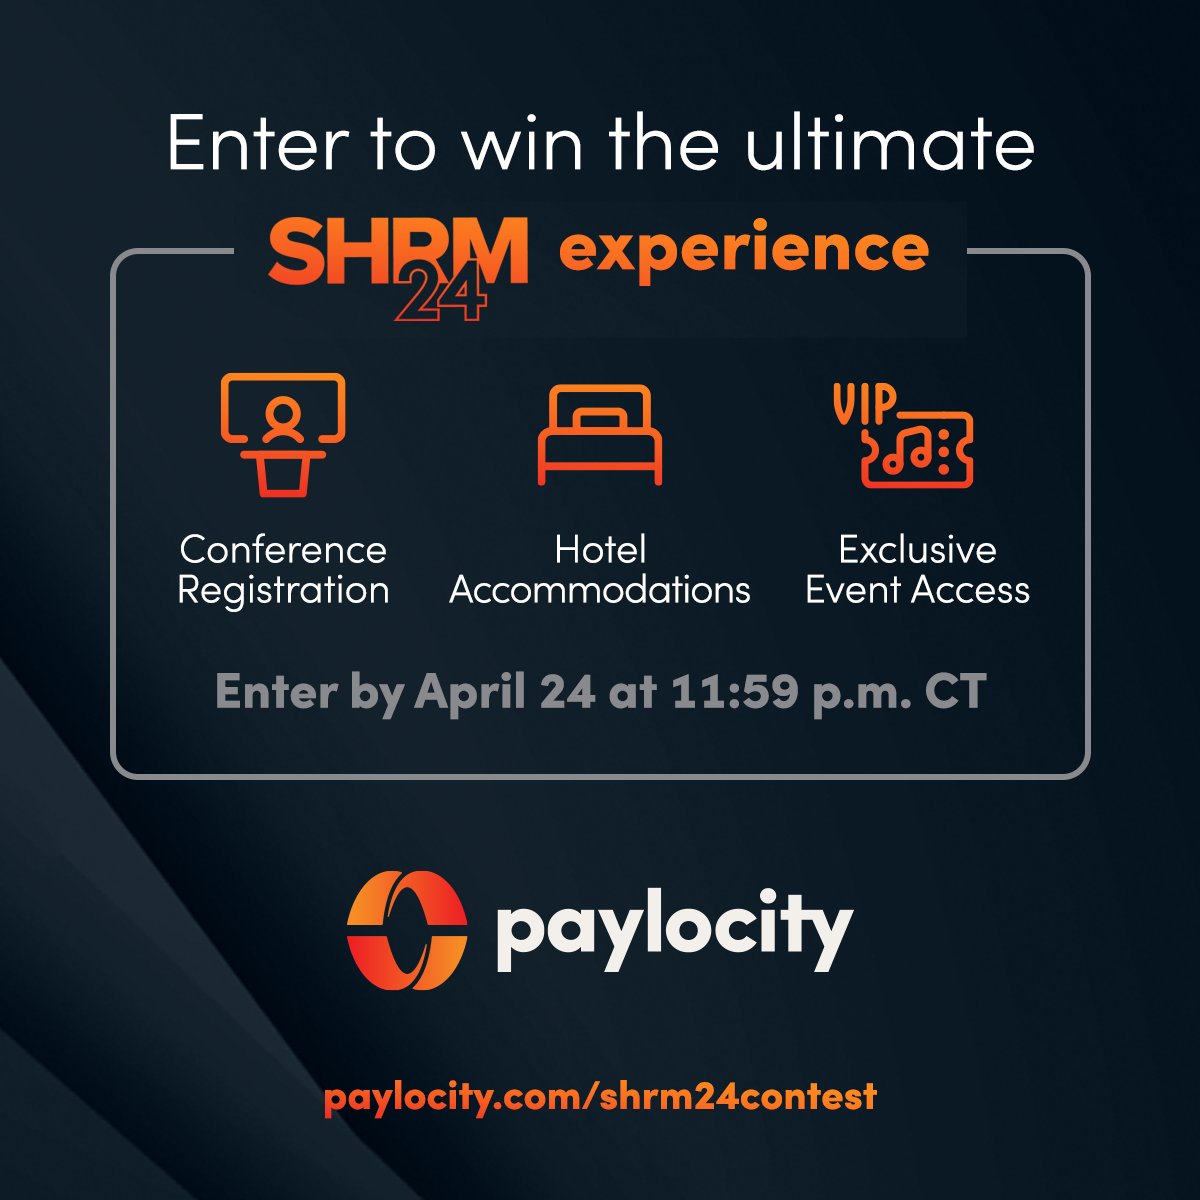 Clock's ticking! ⏰ Last chance to join our #SHRM24 contest. Snag your unique Paylocity experience in Chicago. Don't miss out - Enter by tonight! Submit here >> bit.ly/3PSU8IQ